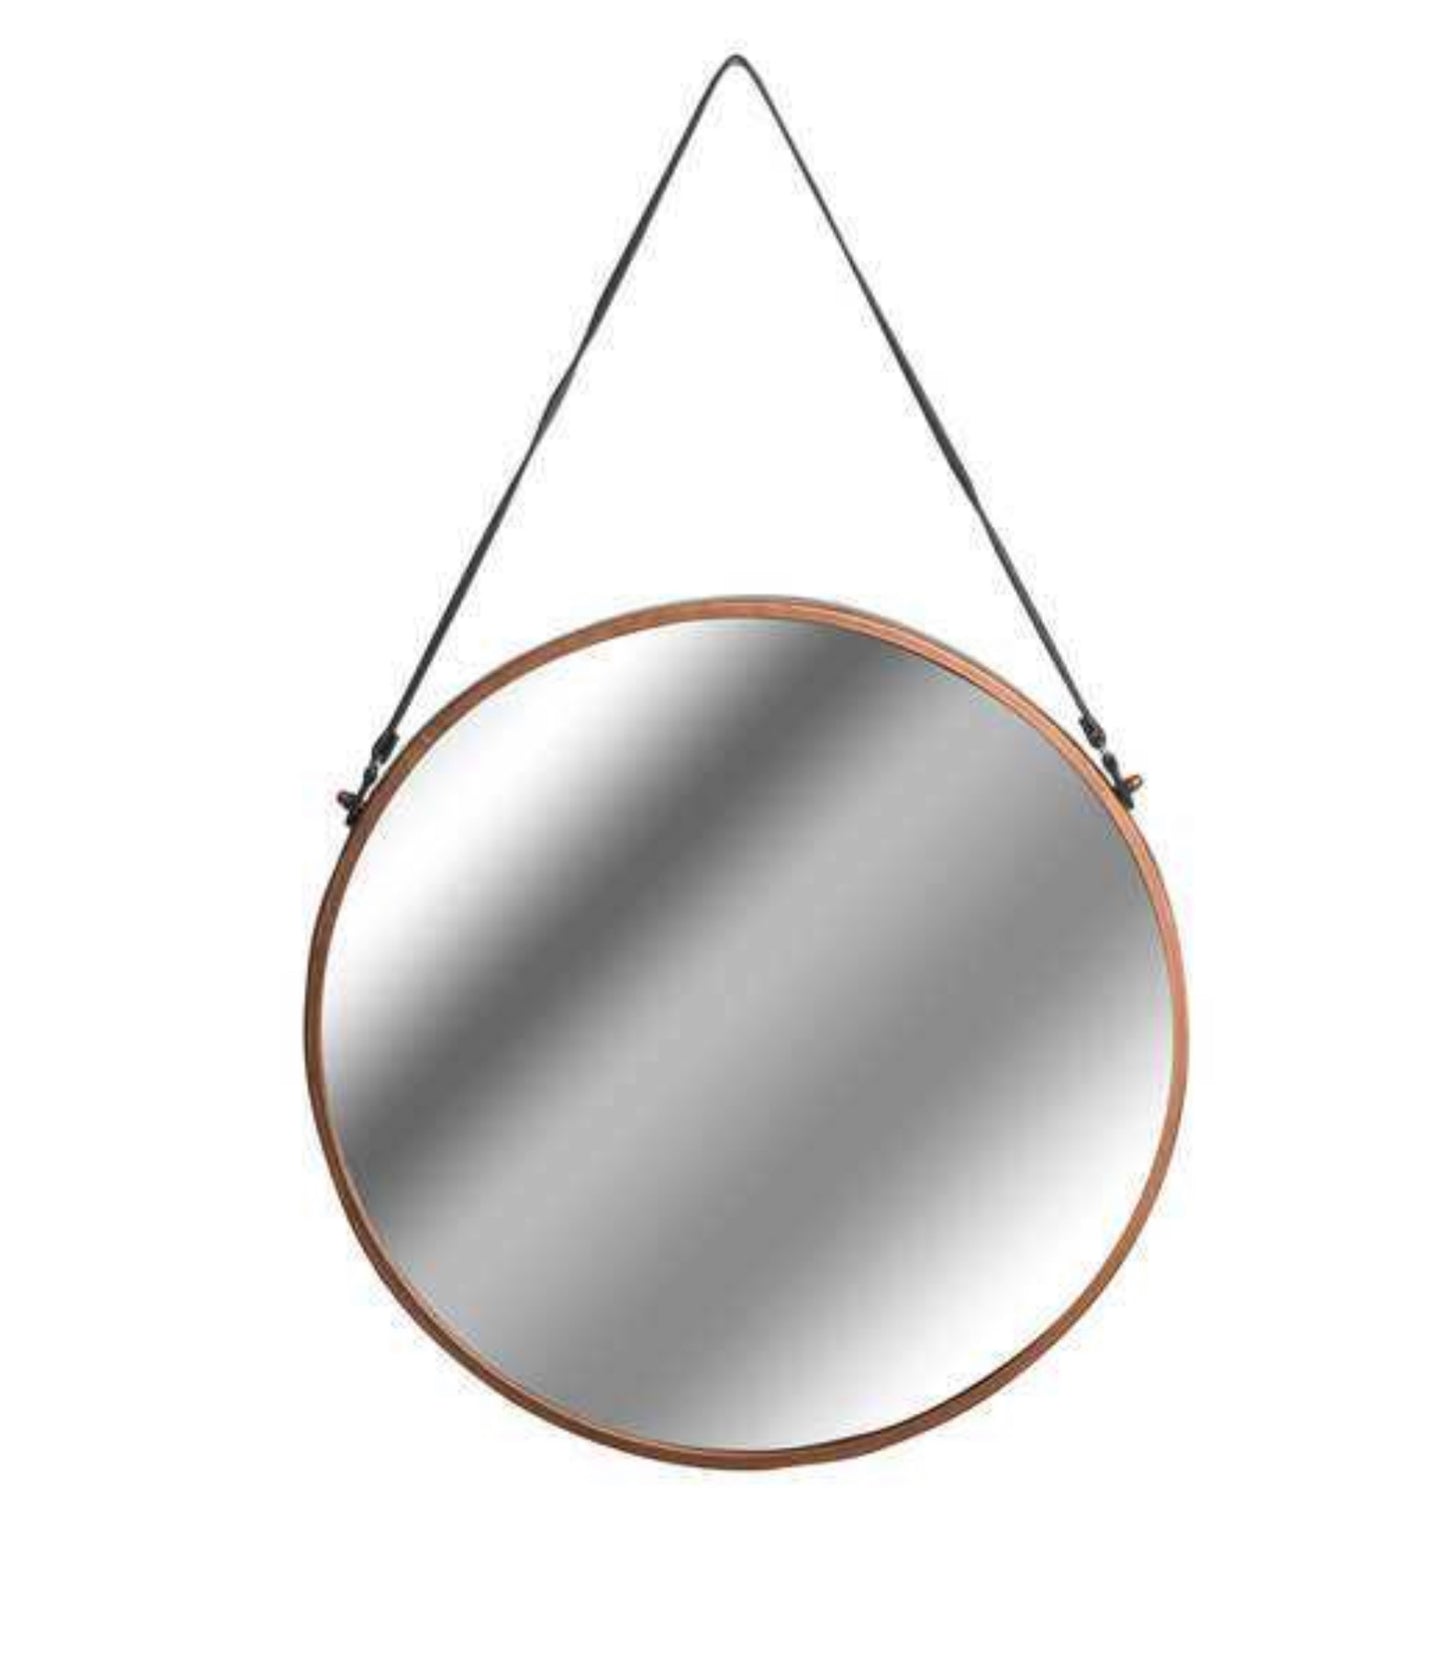 Round copper rimmed hanging wall mirror with strap. 